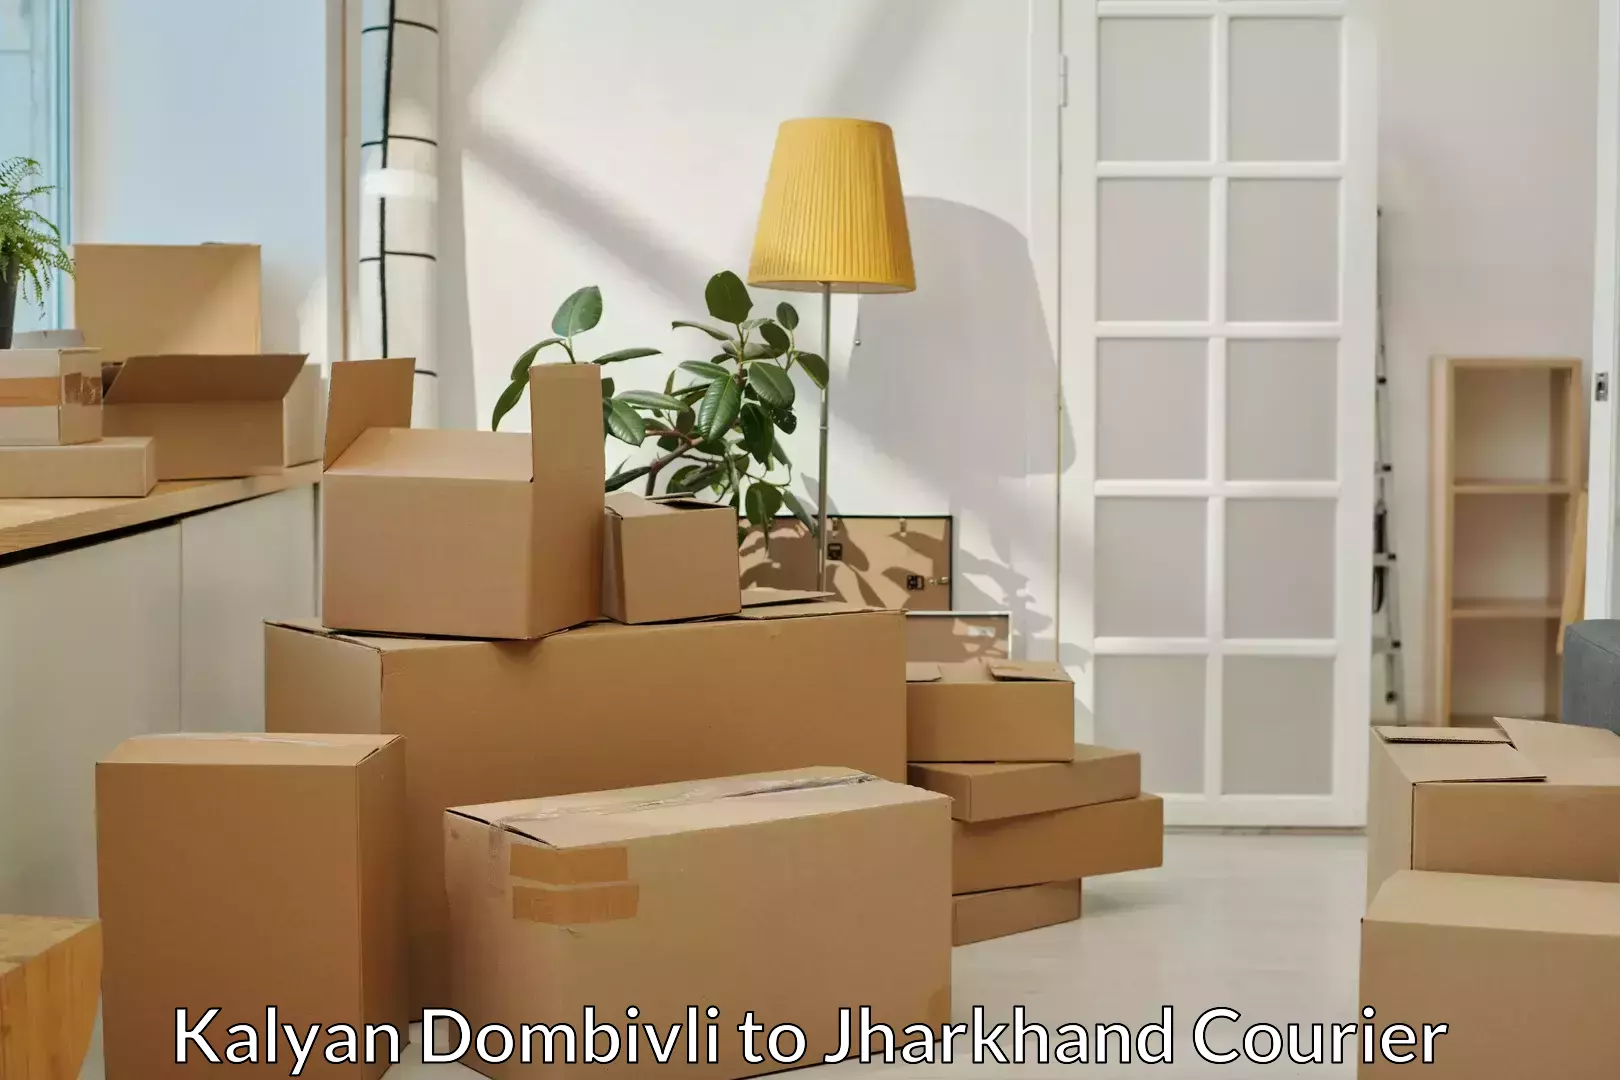 Skilled furniture movers in Kalyan Dombivli to Mahagama